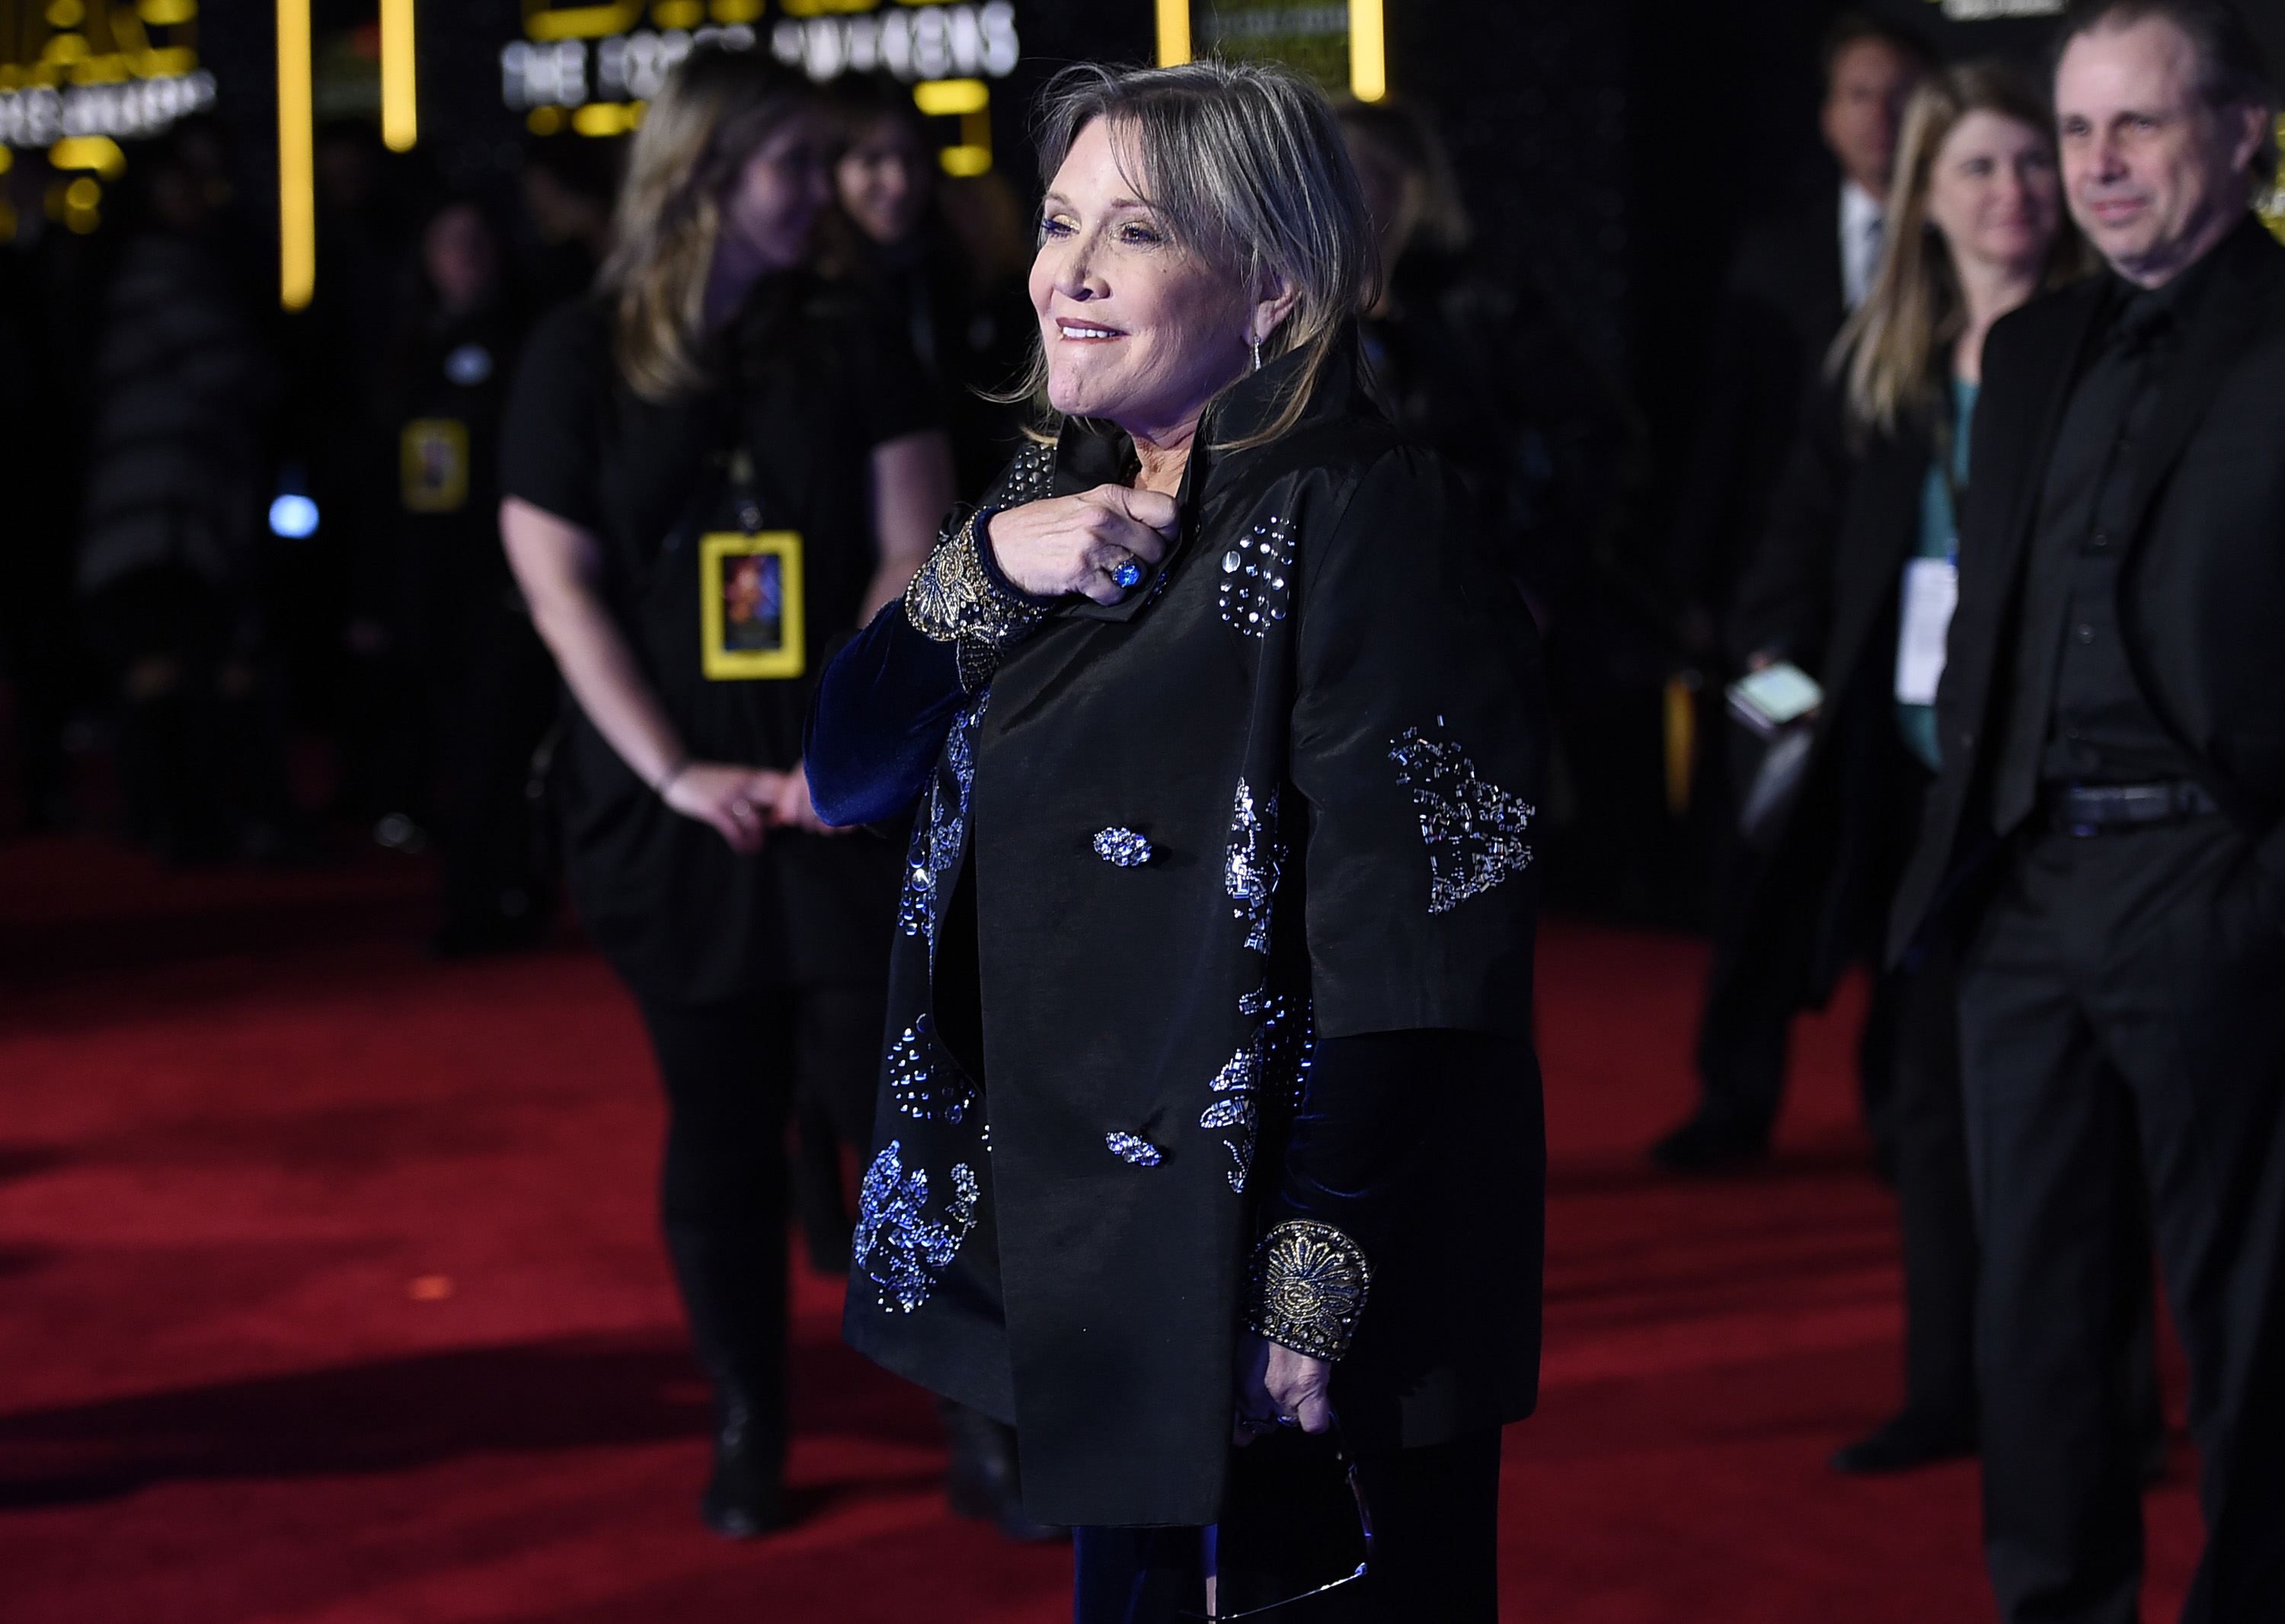 Carrie Fisher says Star Wars VII 'is cursed' - NZ Herald